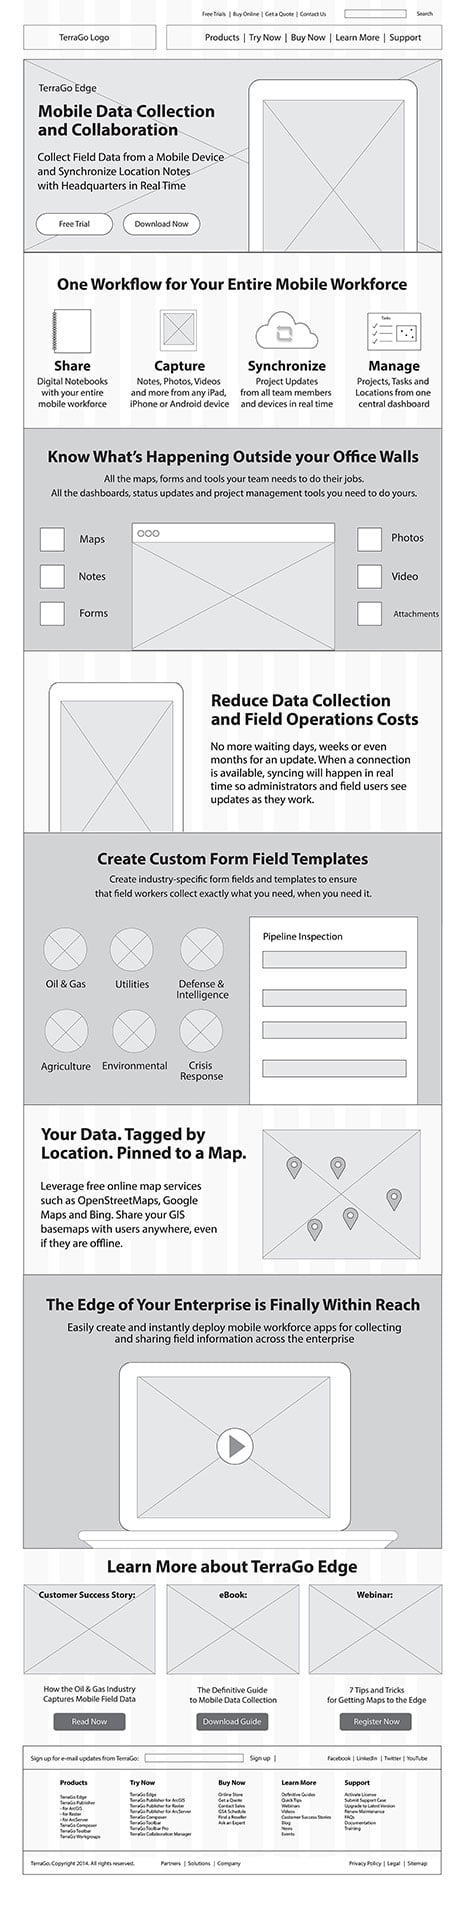 TerraGo Edge Product Page Wireframe